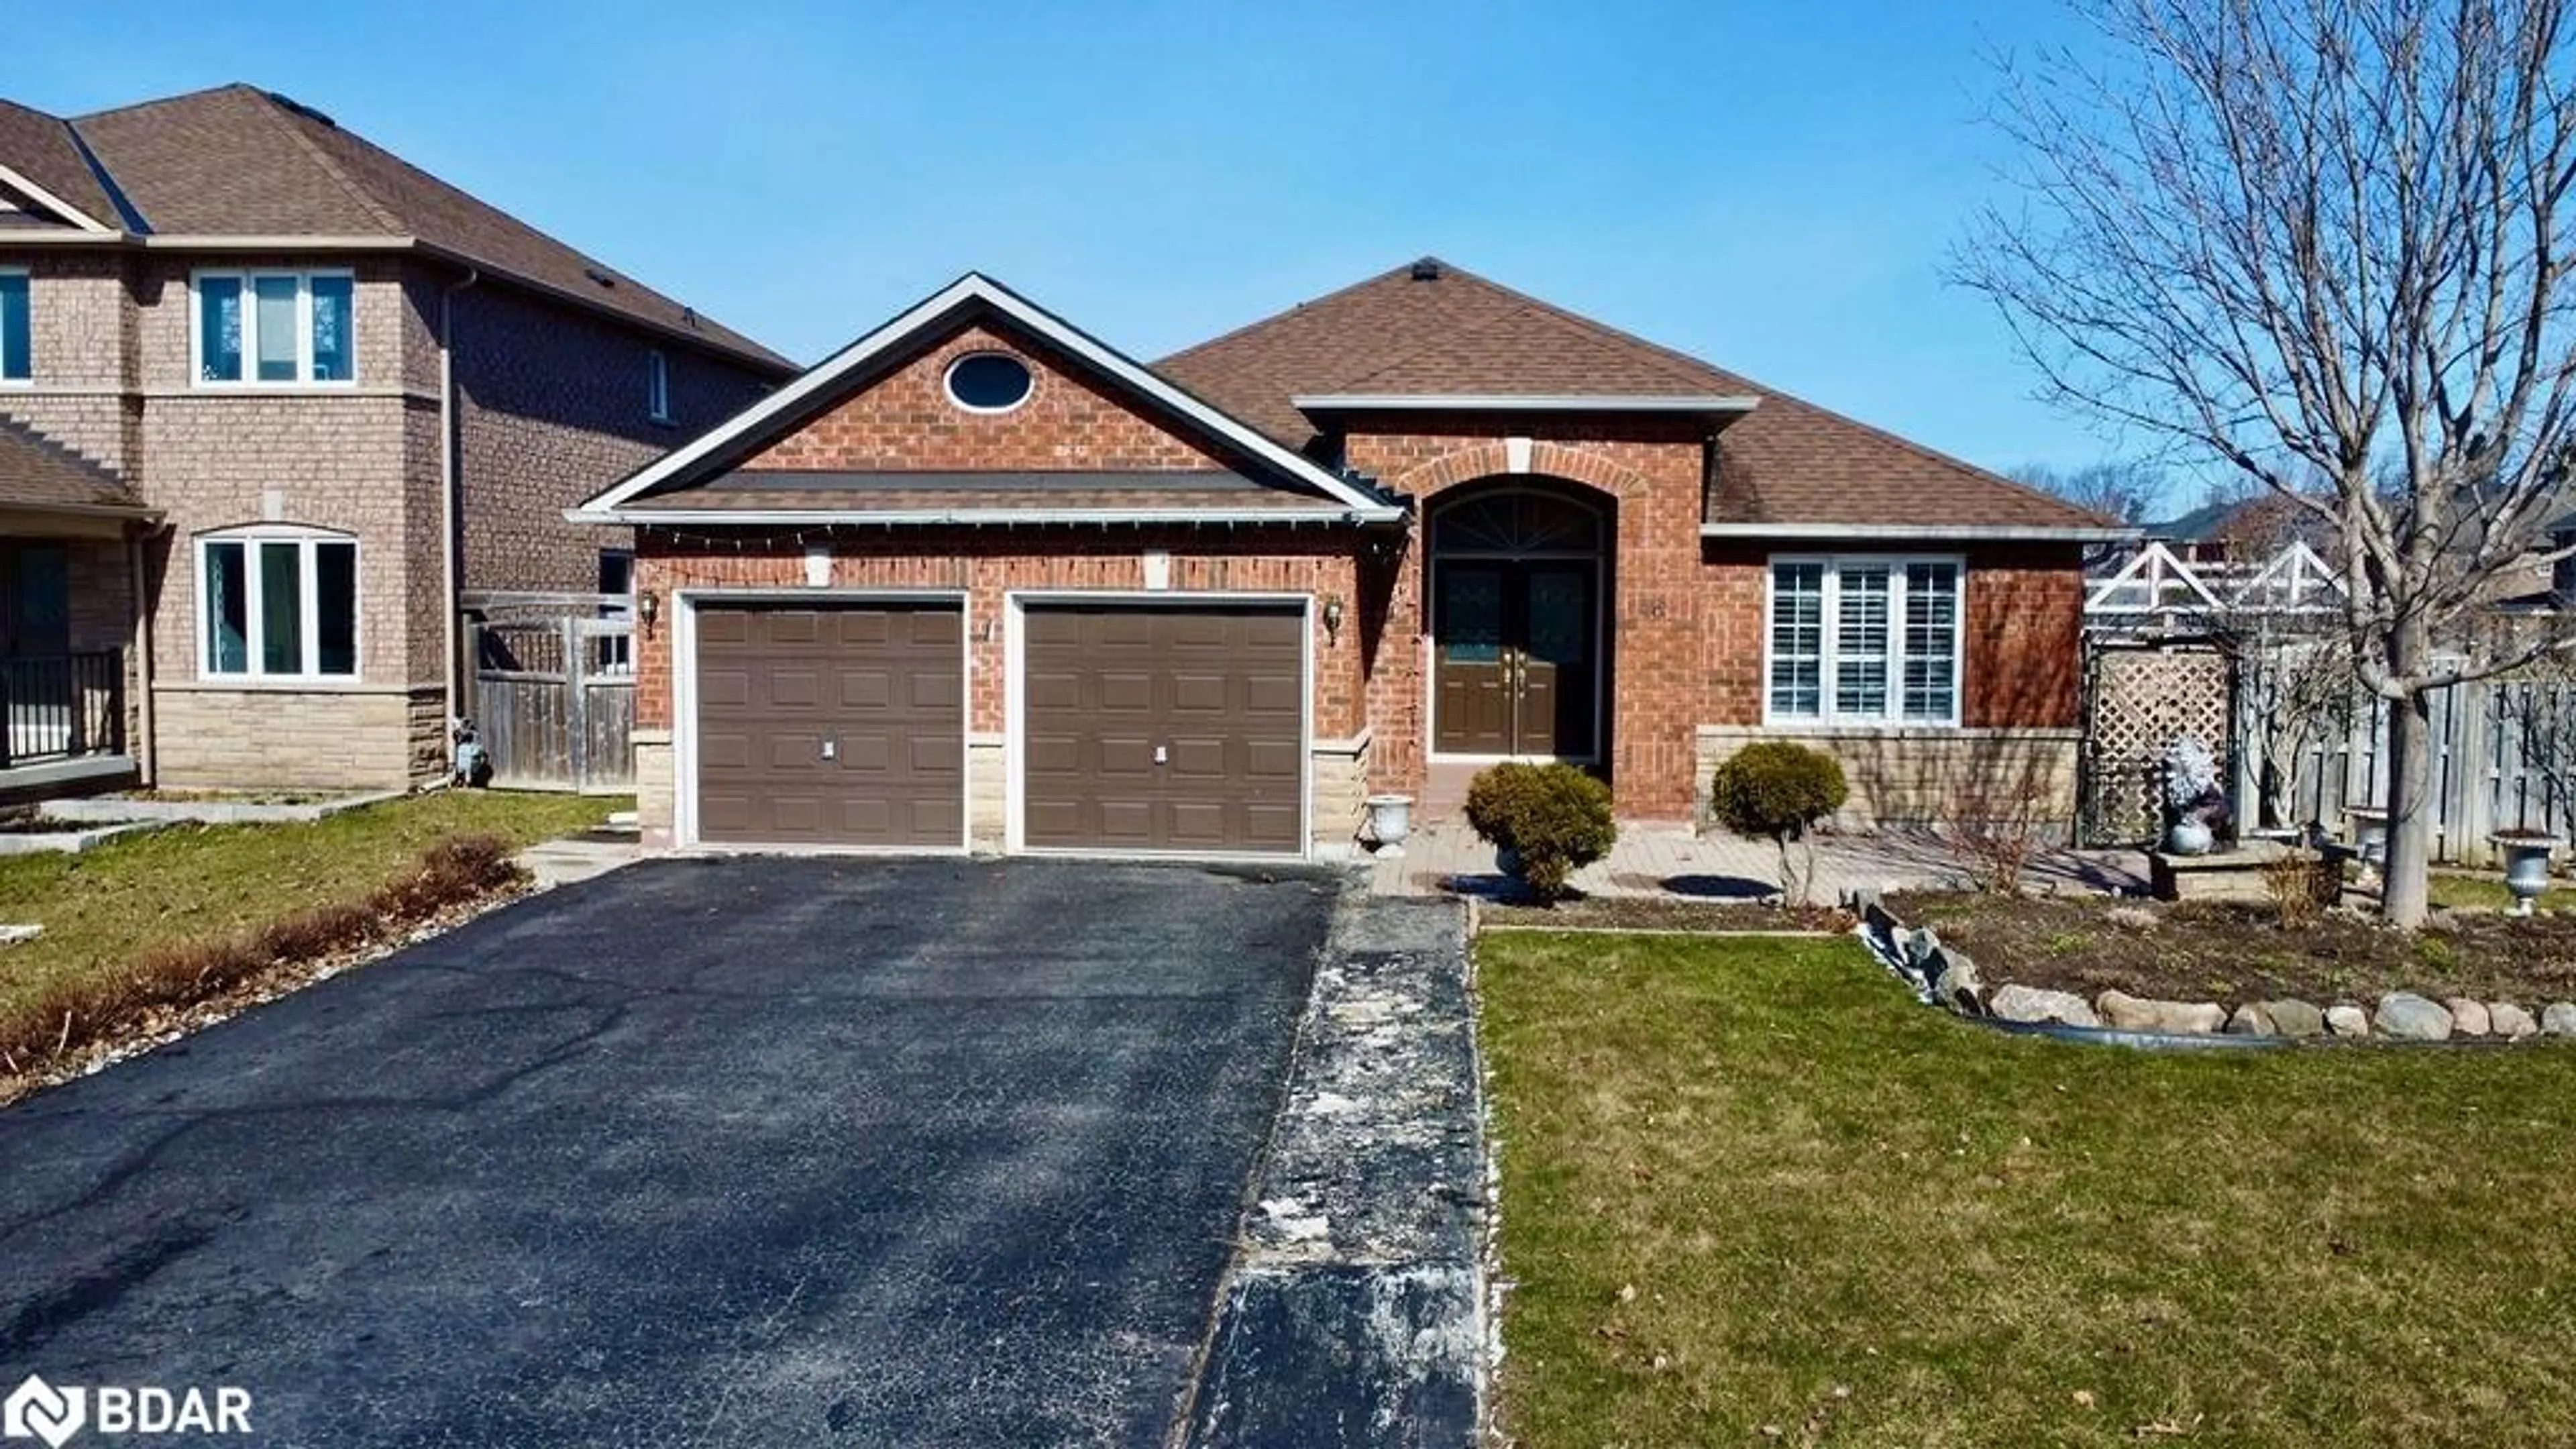 Home with brick exterior material for 46 Jewel House Lane, Barrie Ontario L4N 0T4